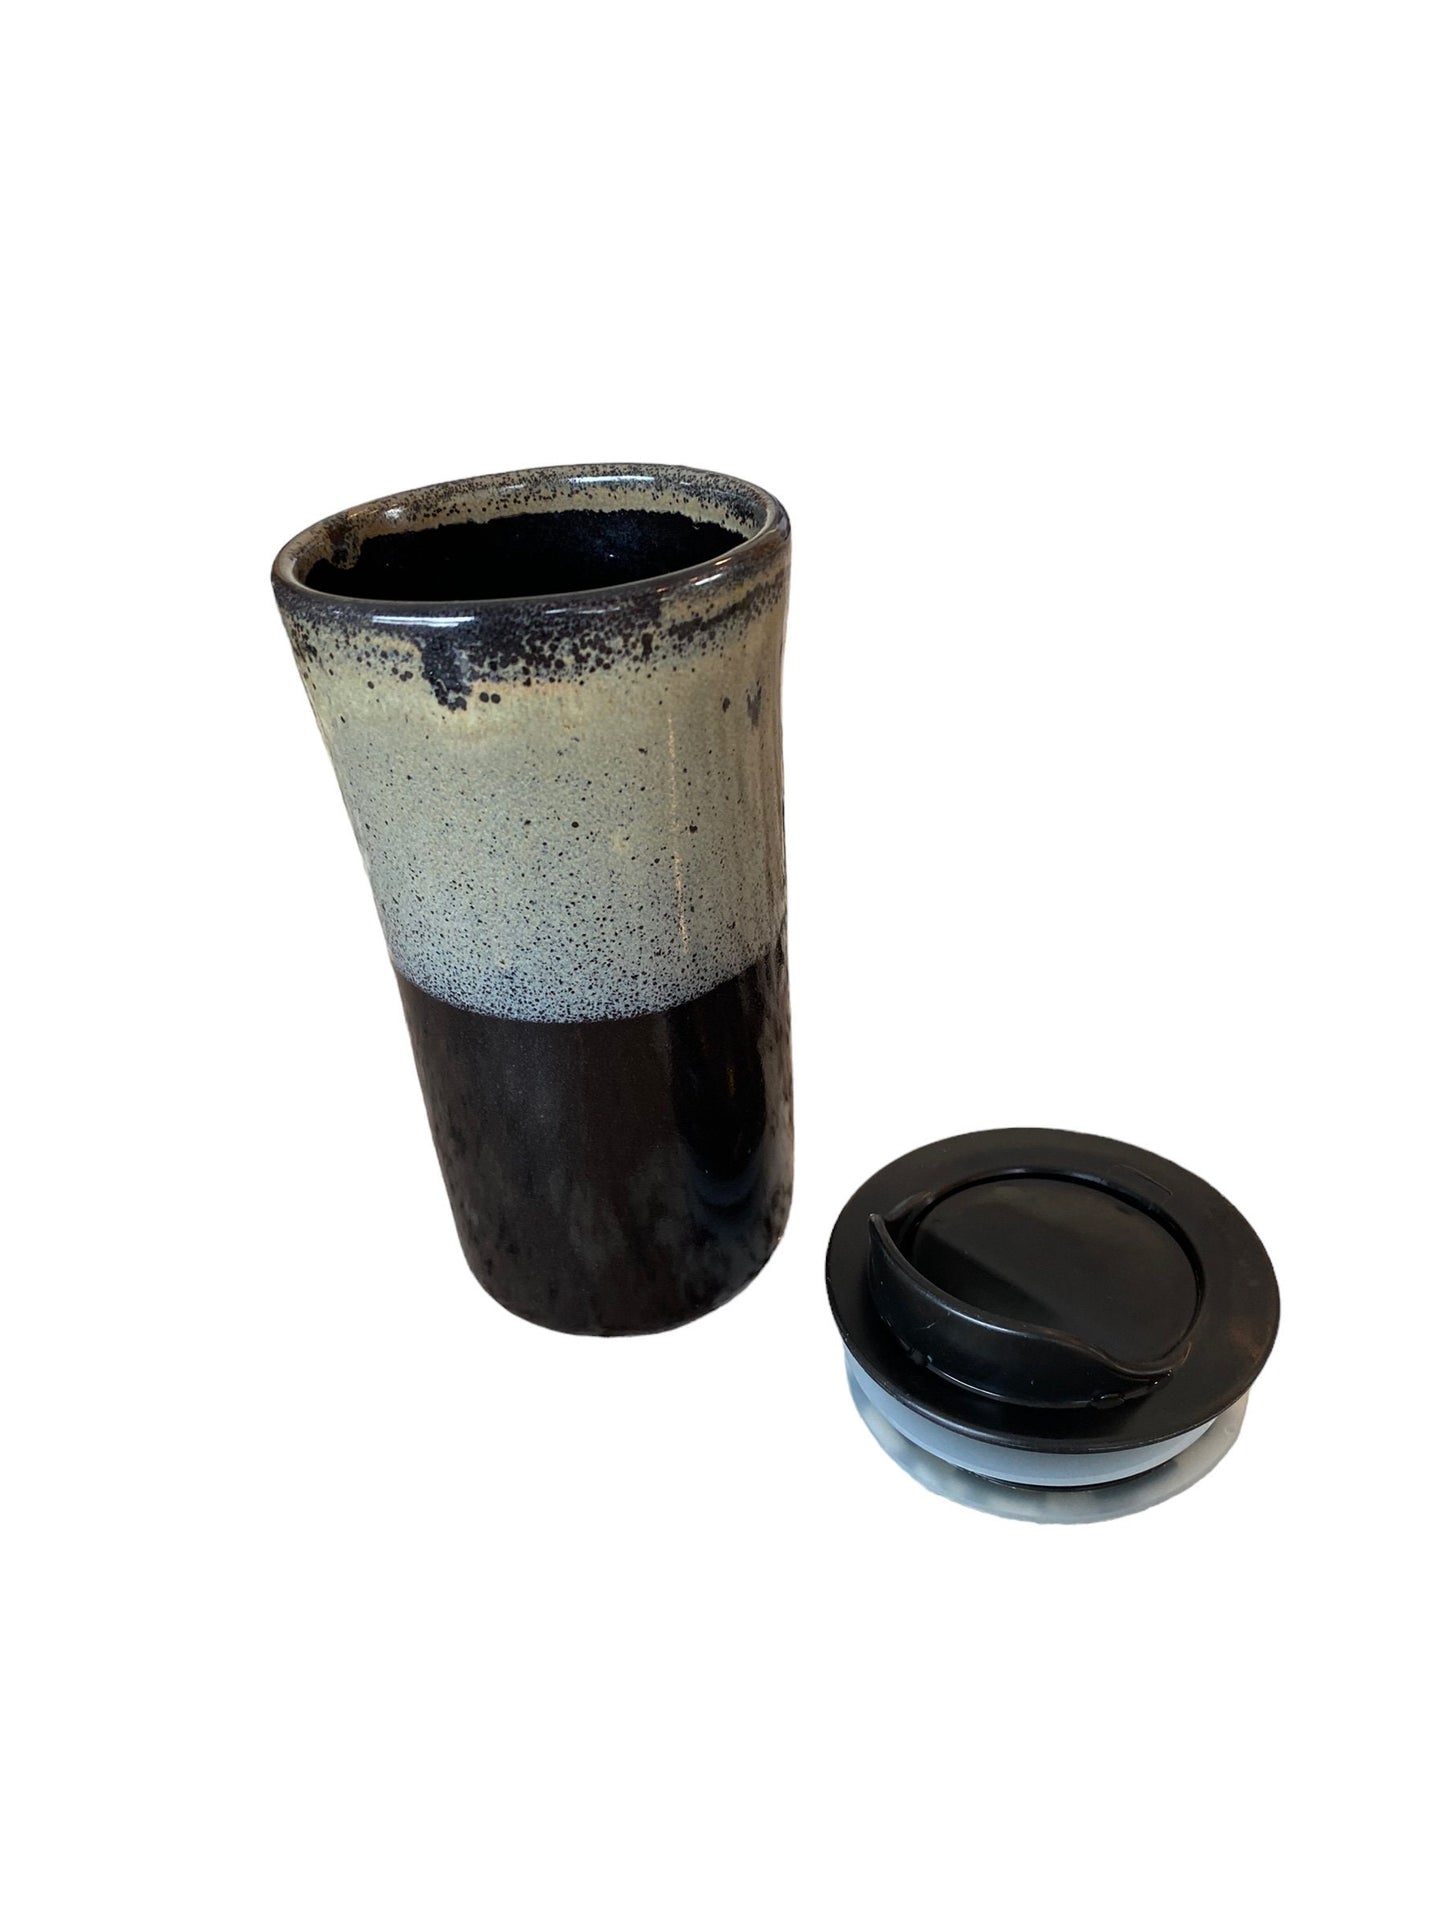 Handmade 16-Ounce Reactive Gray and Black Glaze Travel Mug - Stylish Pottery with Sleeve for Your On-the-Go Coffee Delight